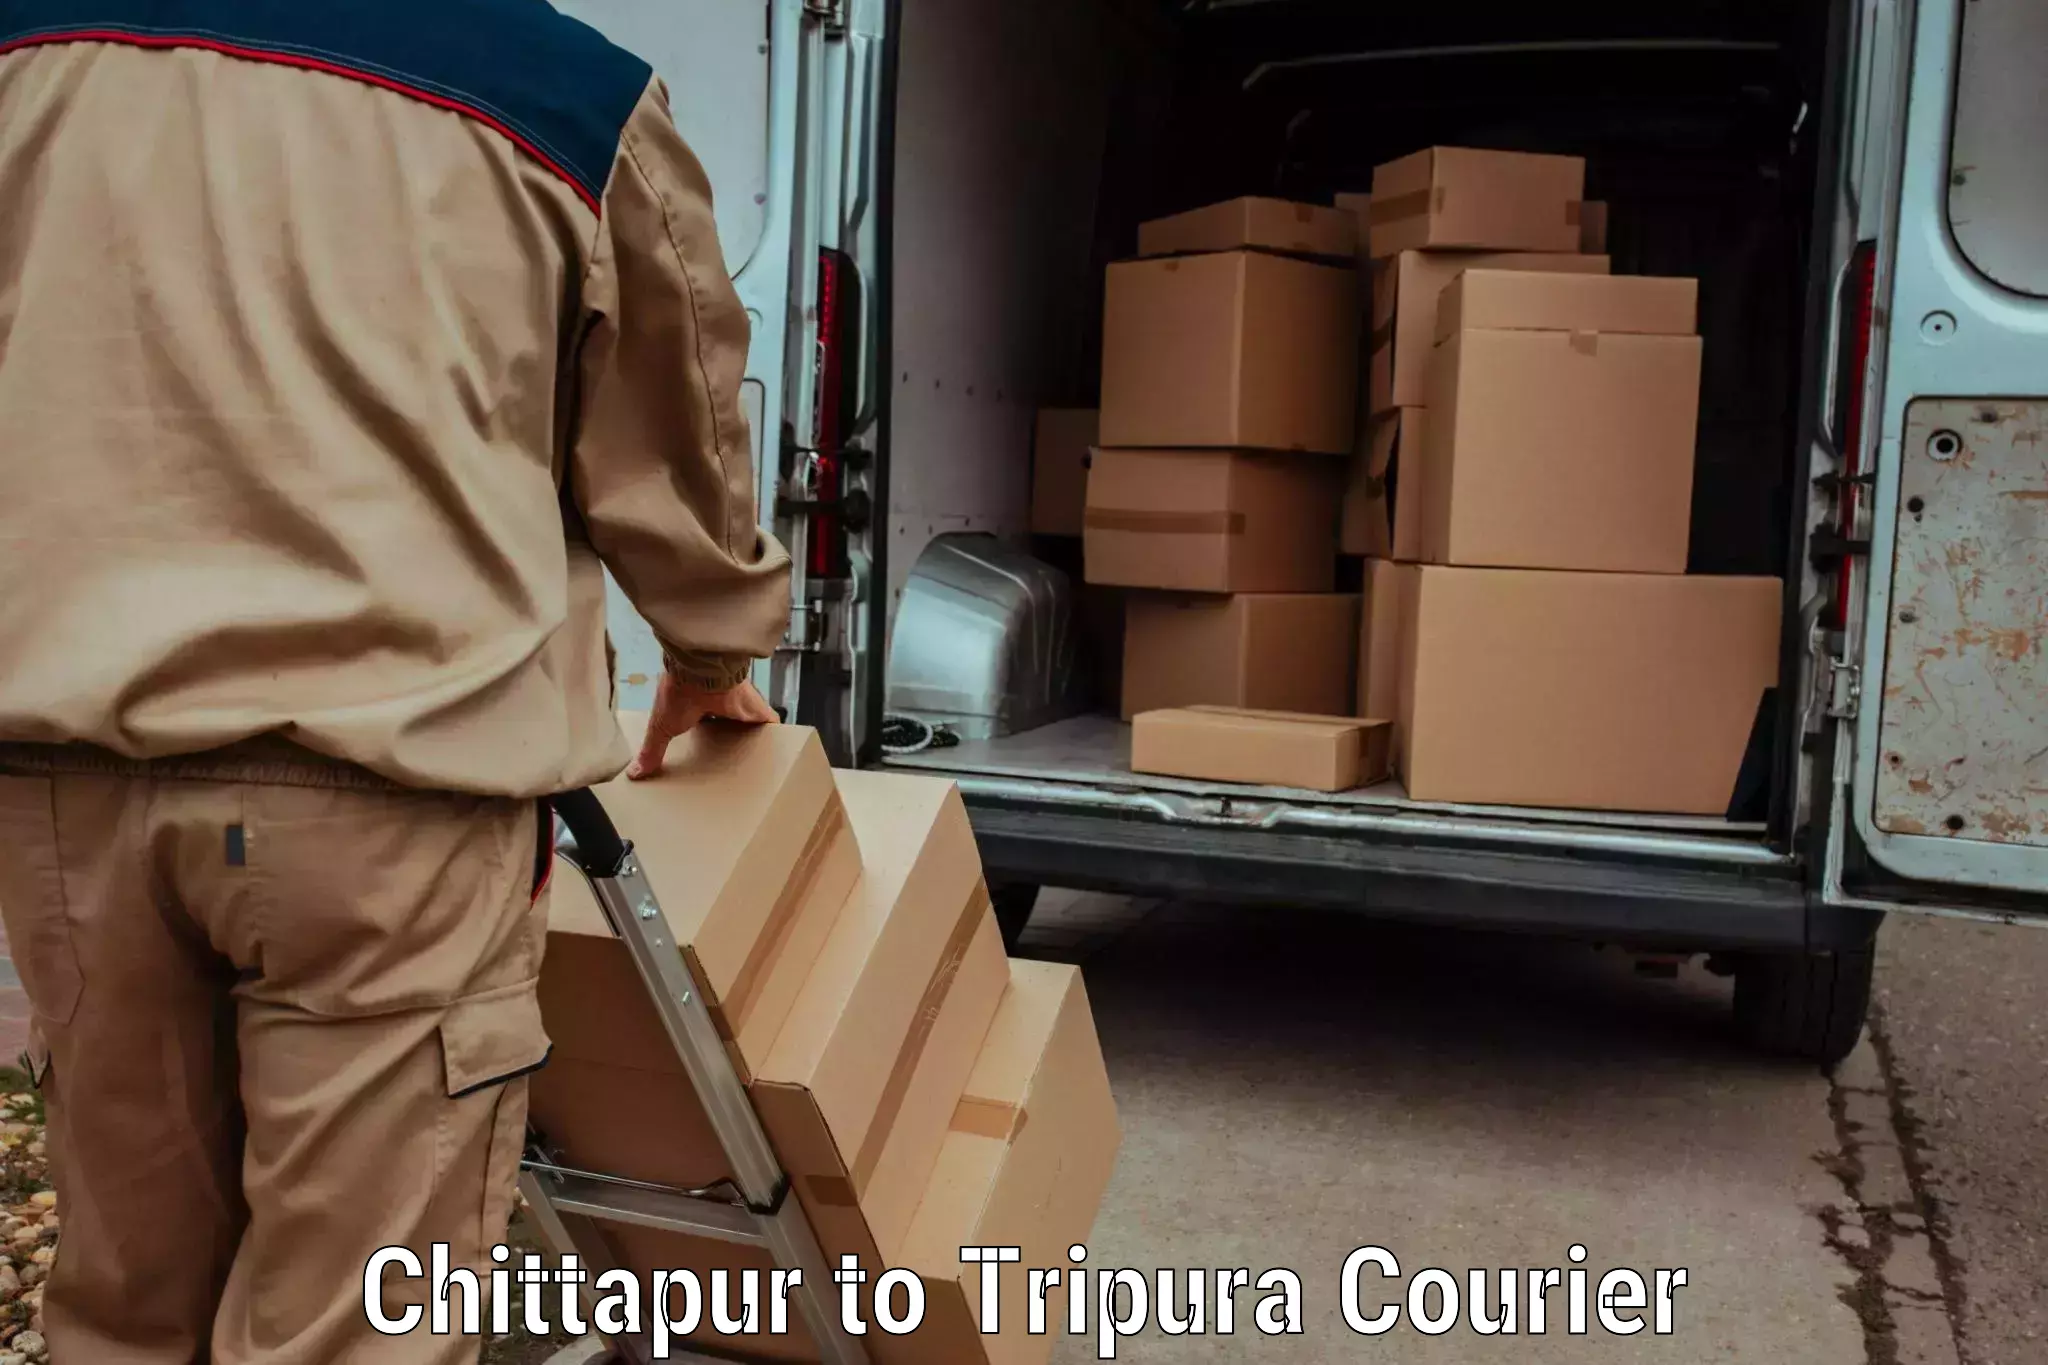 State-of-the-art courier technology Chittapur to Udaipur Tripura